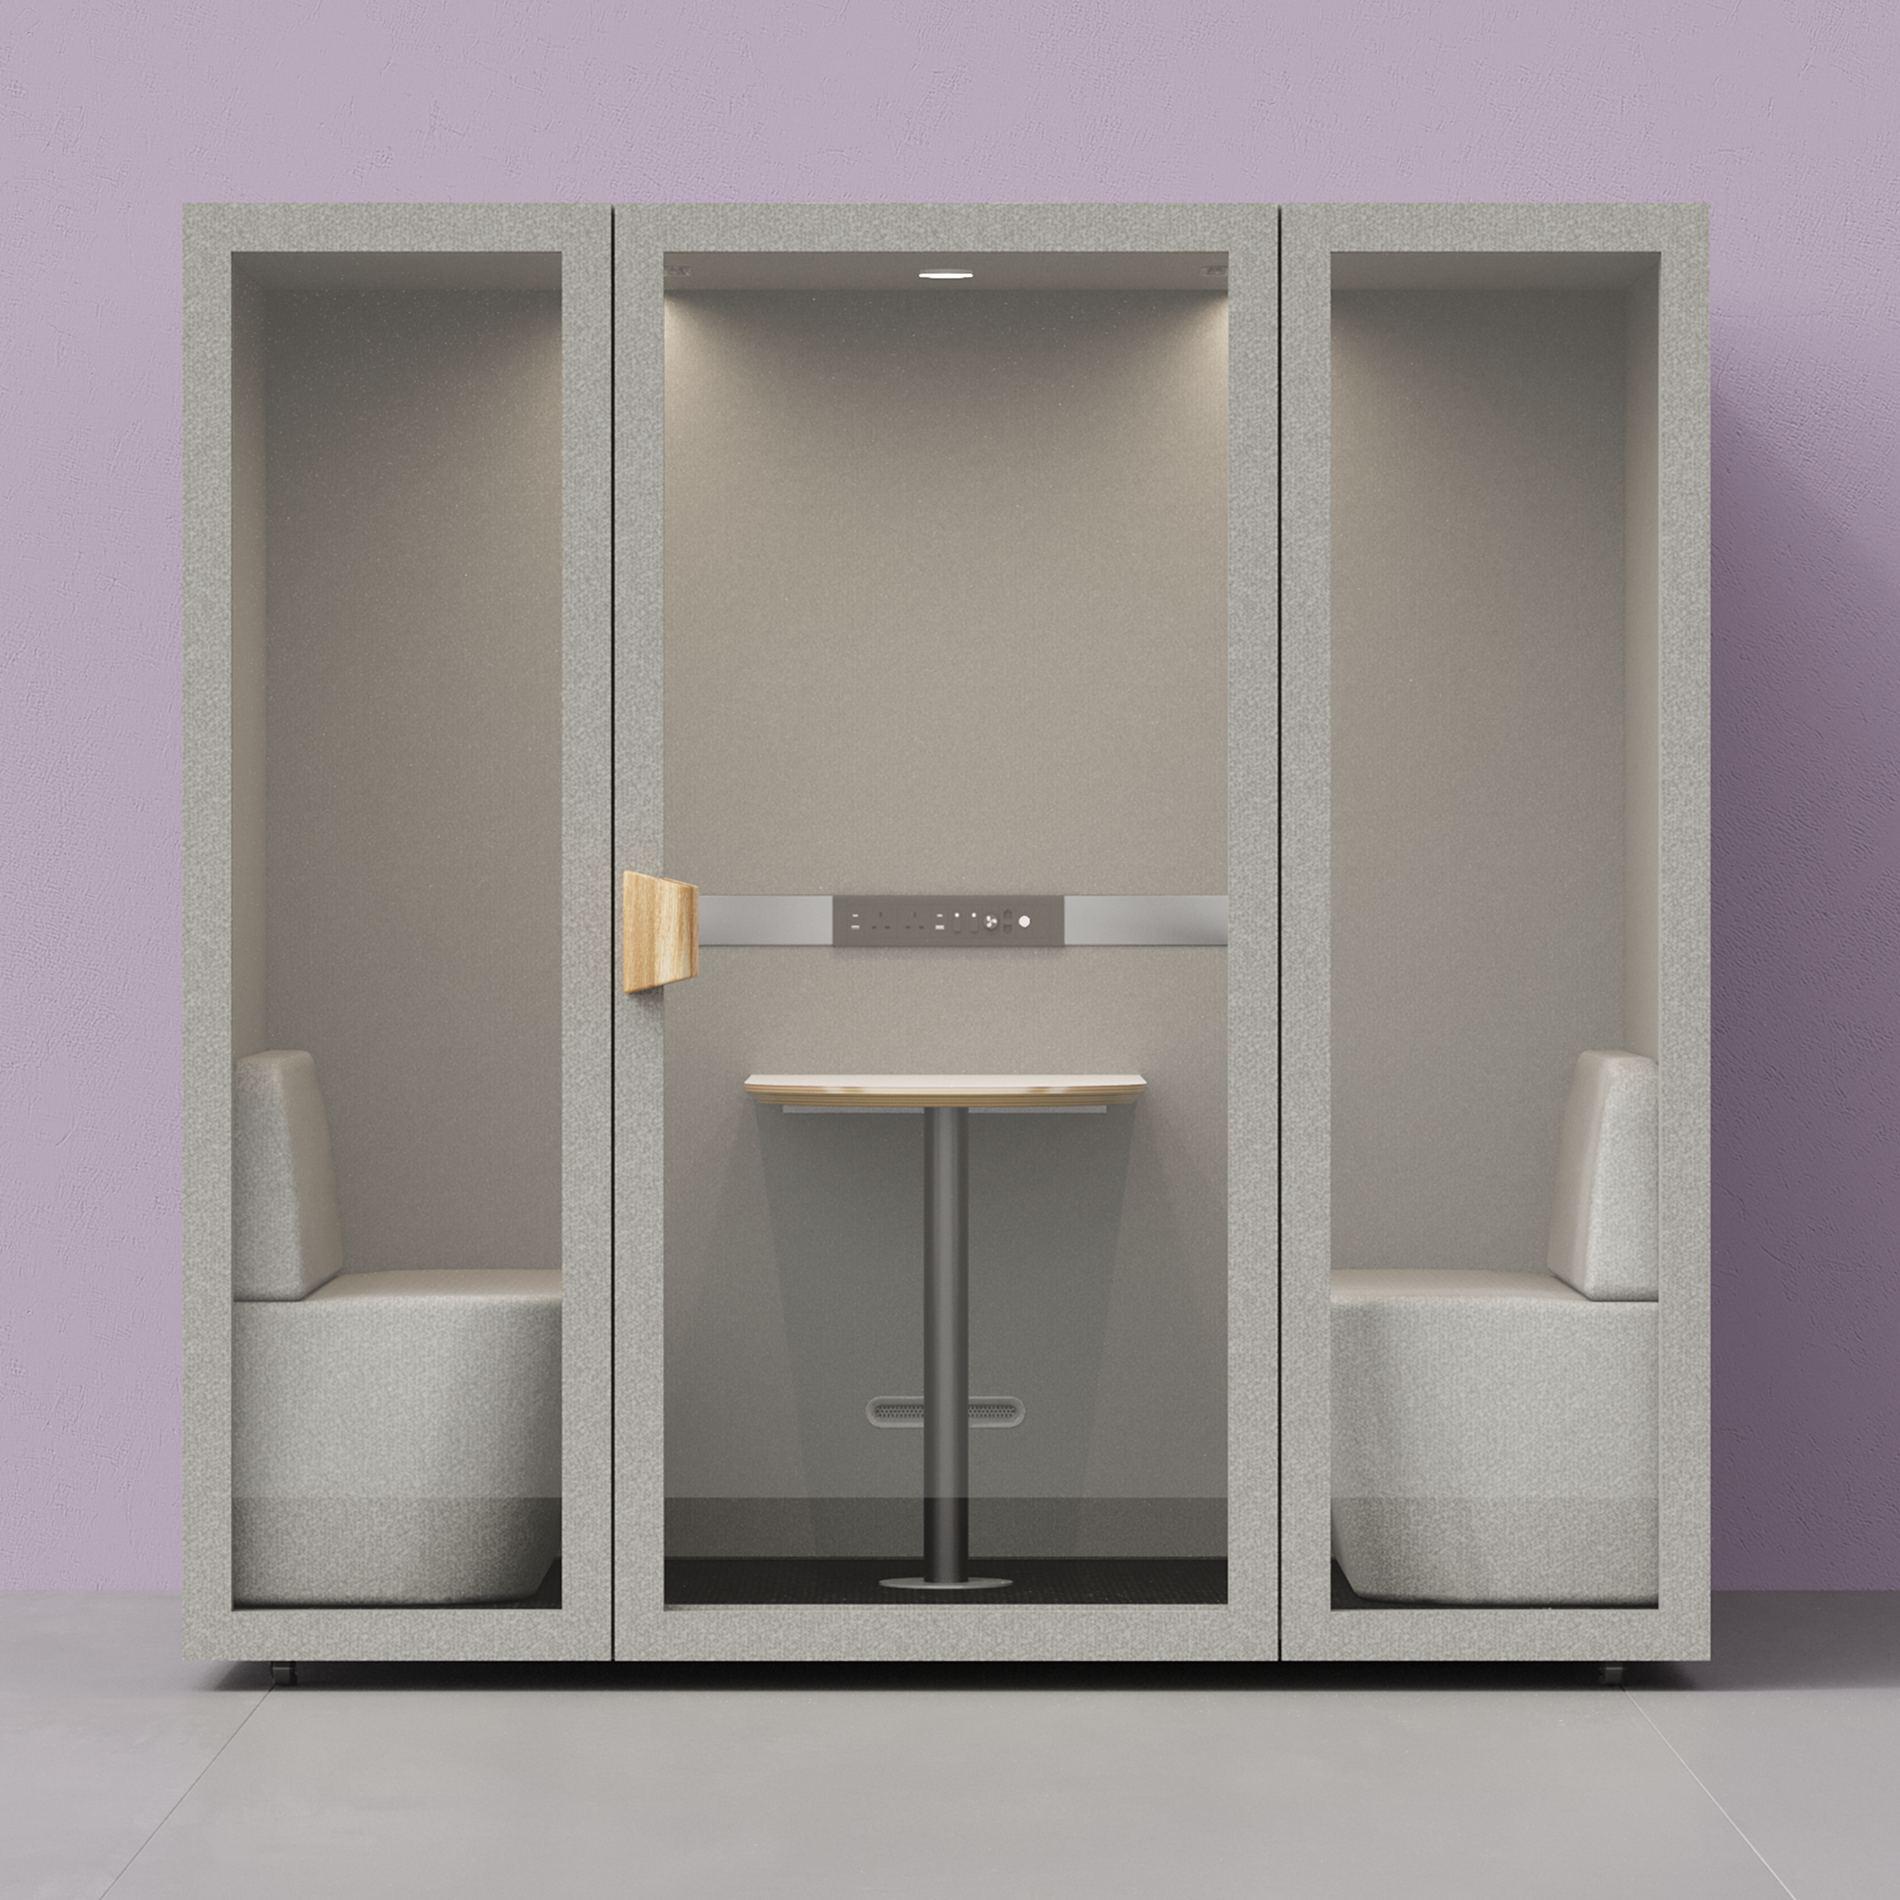 2 - 4 Person Meeting BoothFolio Pebble Grey / Furniture As Per Images